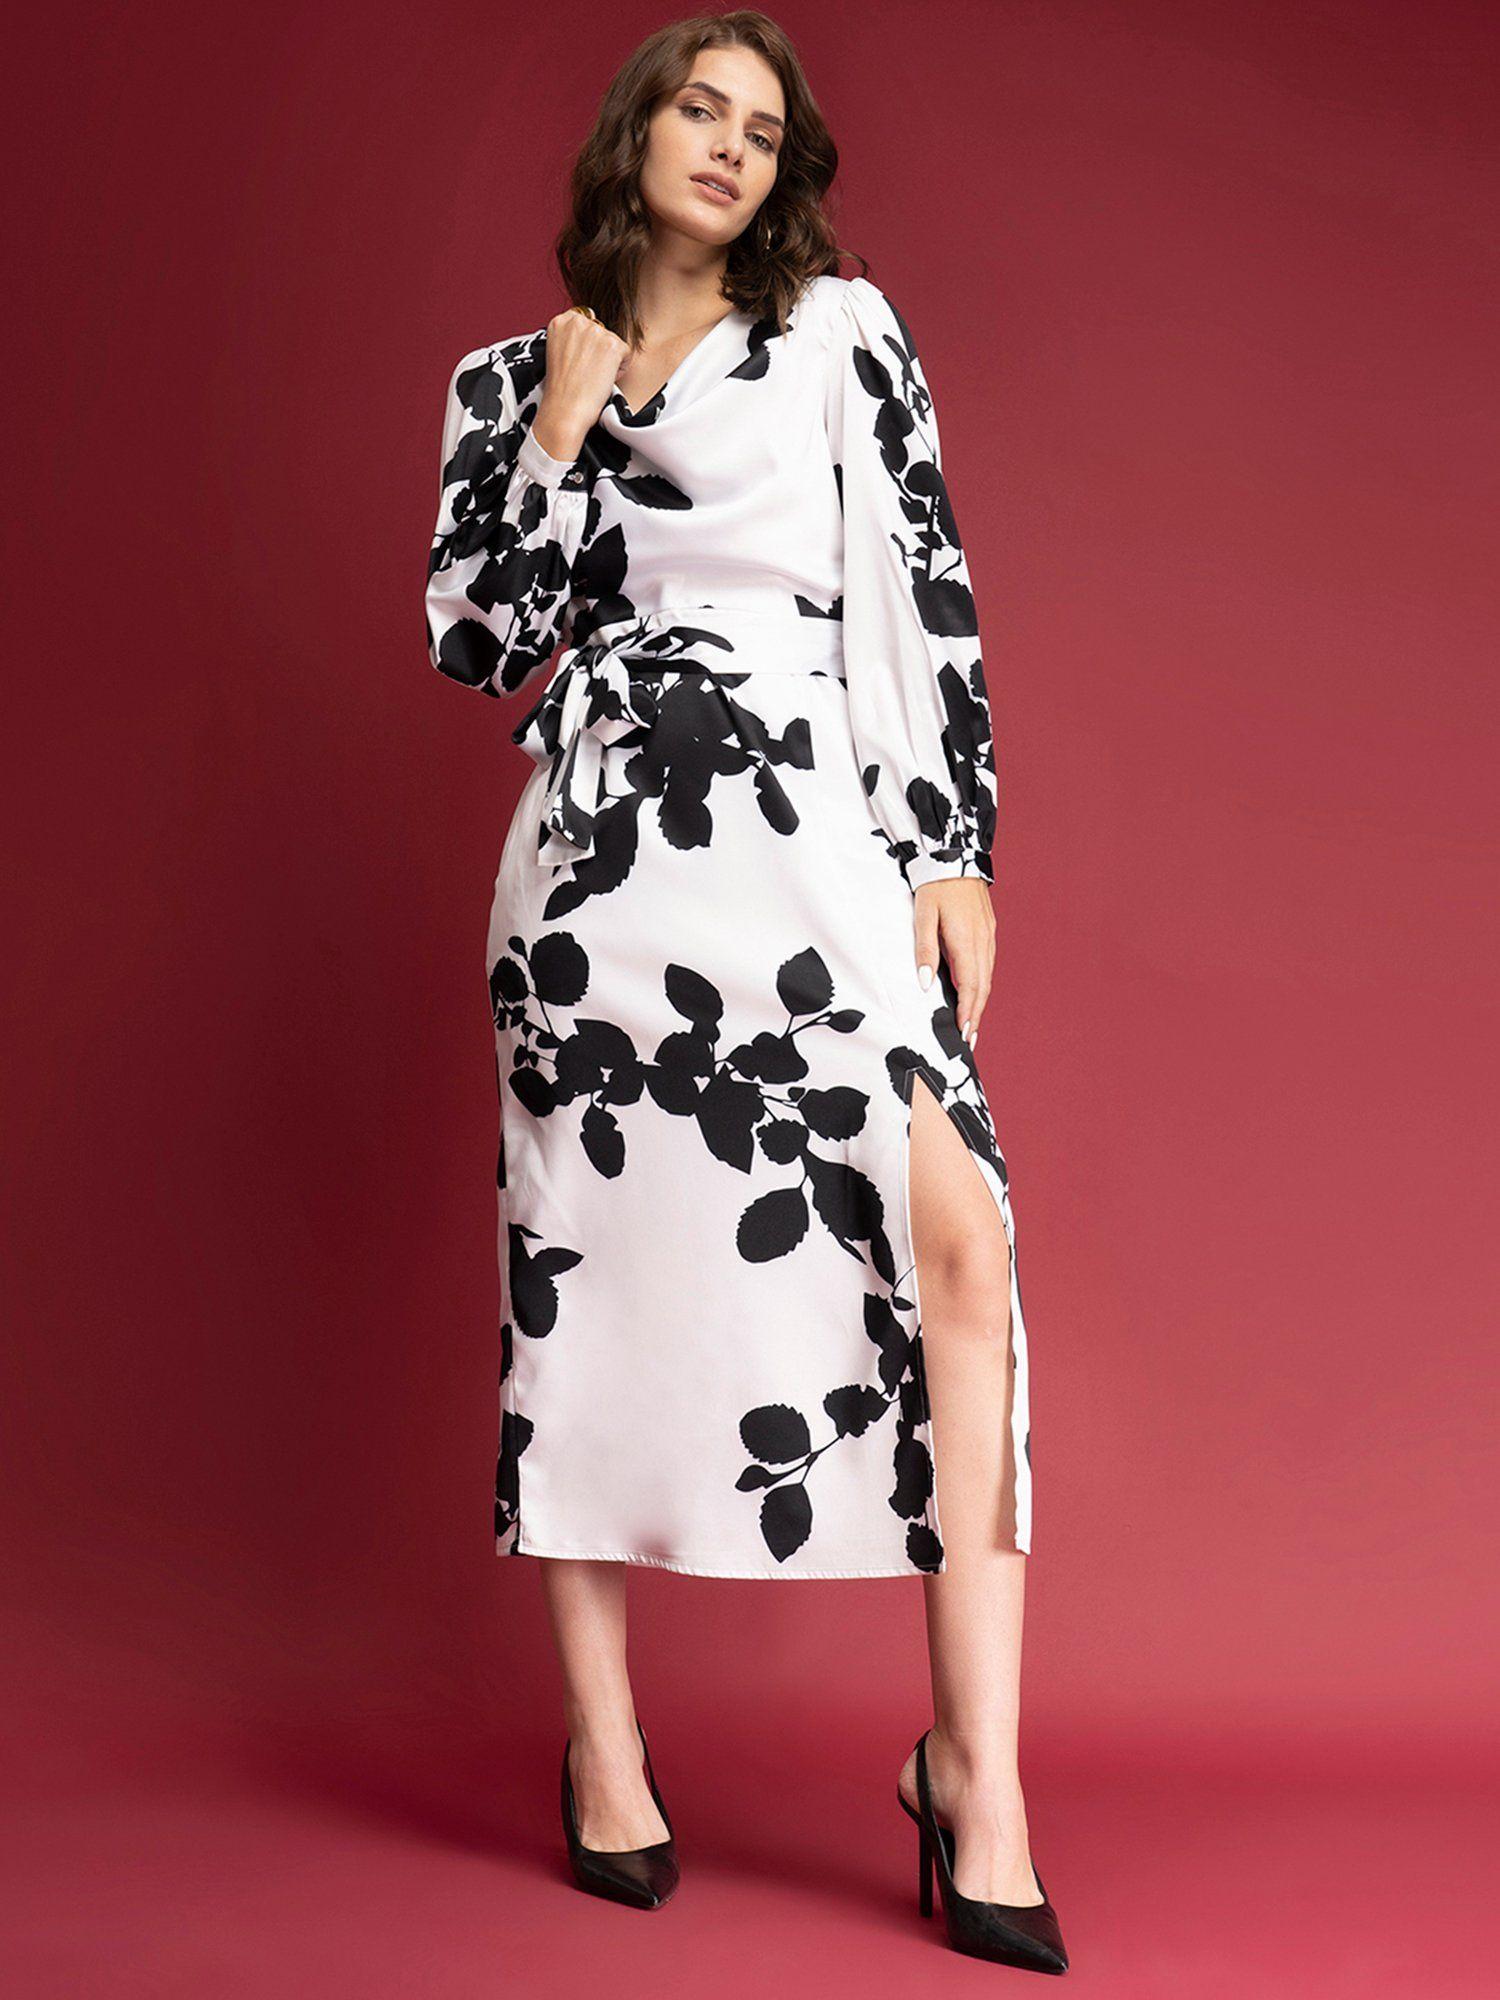 satin floral print a-line dress - black and white